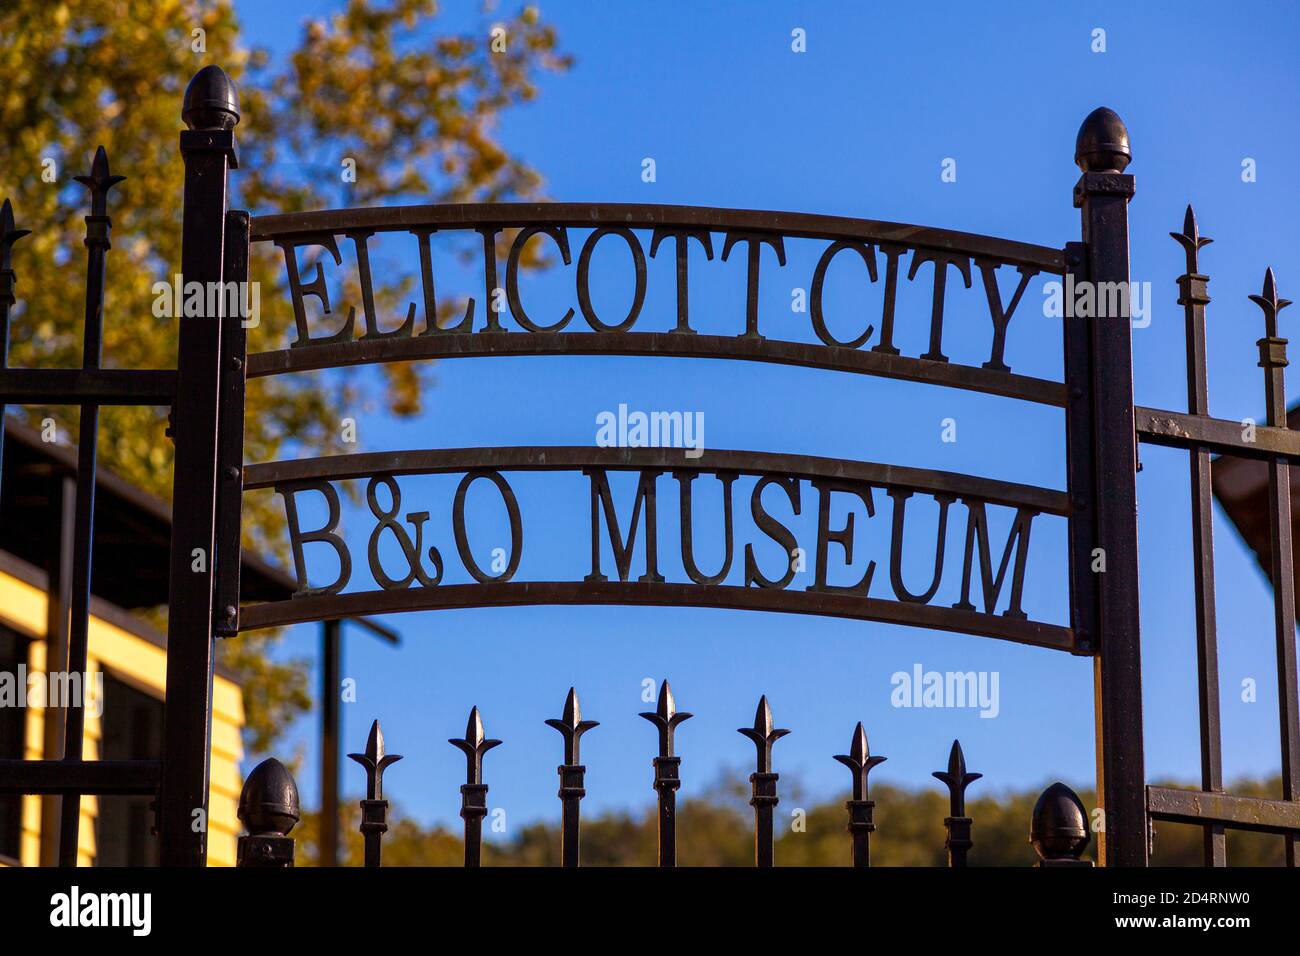 Ellicott City, MD USA 10/07/2020: Entrance of historic Ellicott City Railroad Station, museum. Built as a part of Baltimore and Ohio Railroad (B&O), i Stock Photo